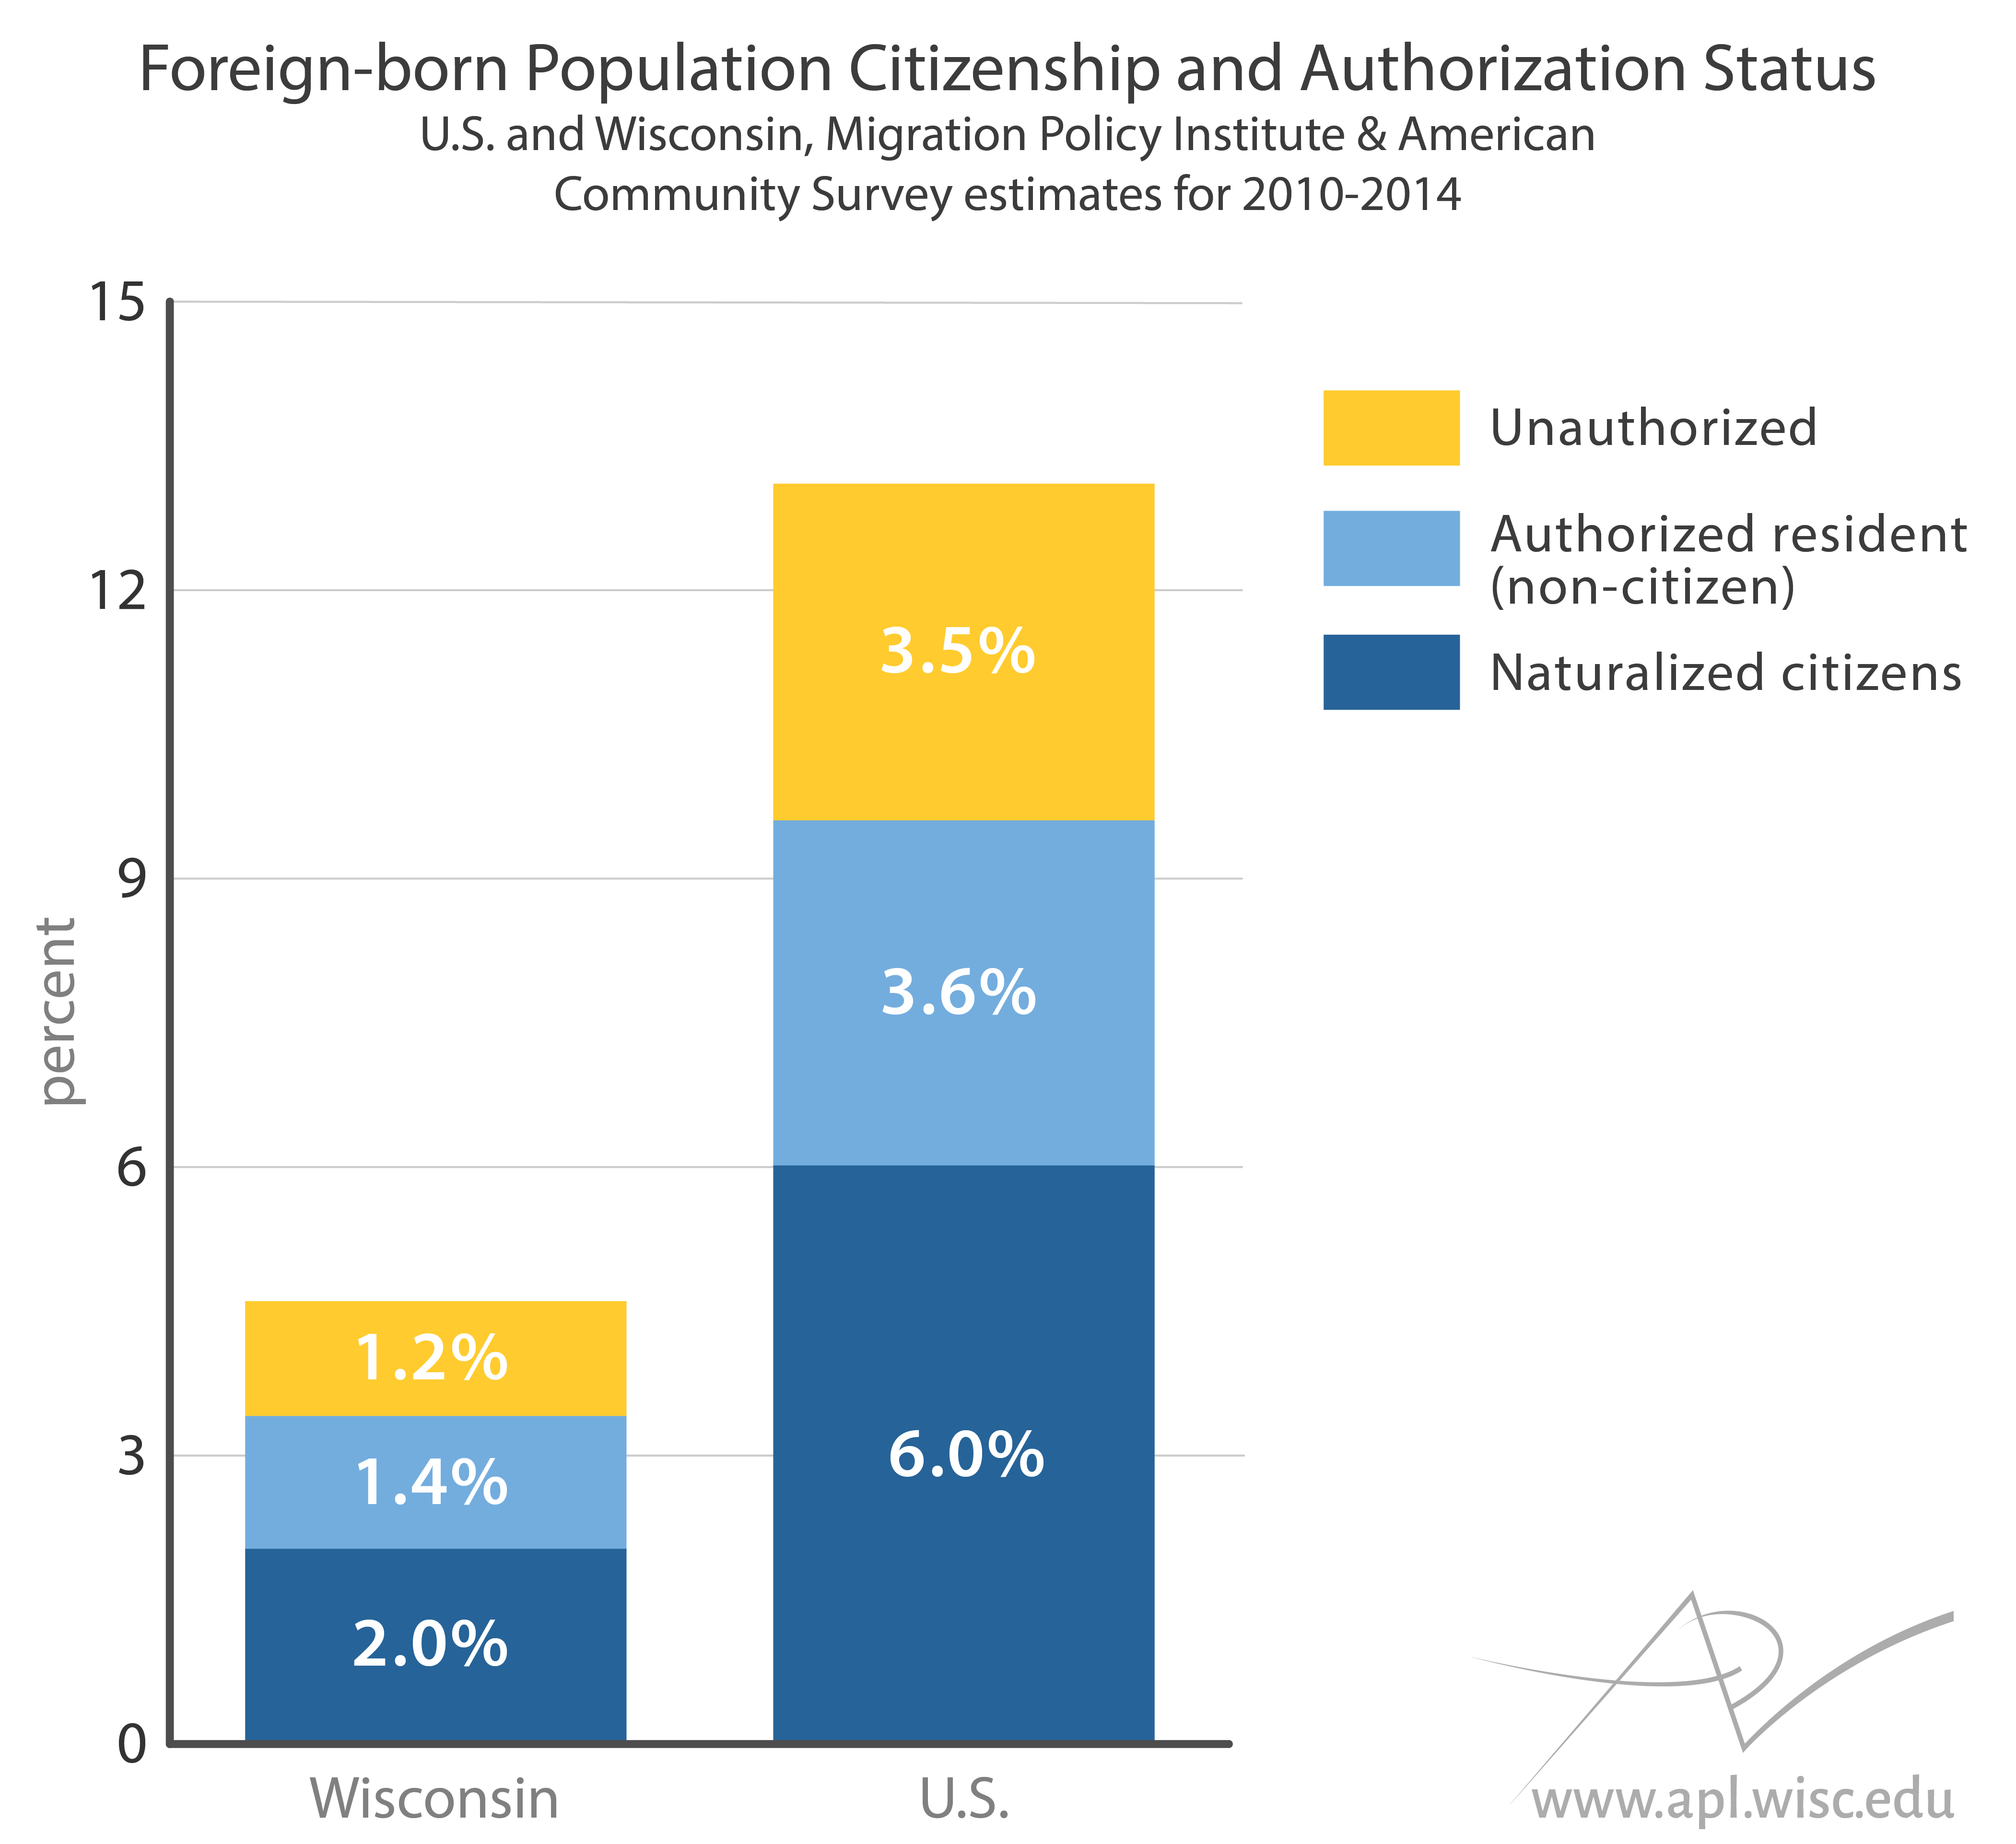 chart showing relative percentages of foreign-born residents and their immigration status in Wisconsin and the US